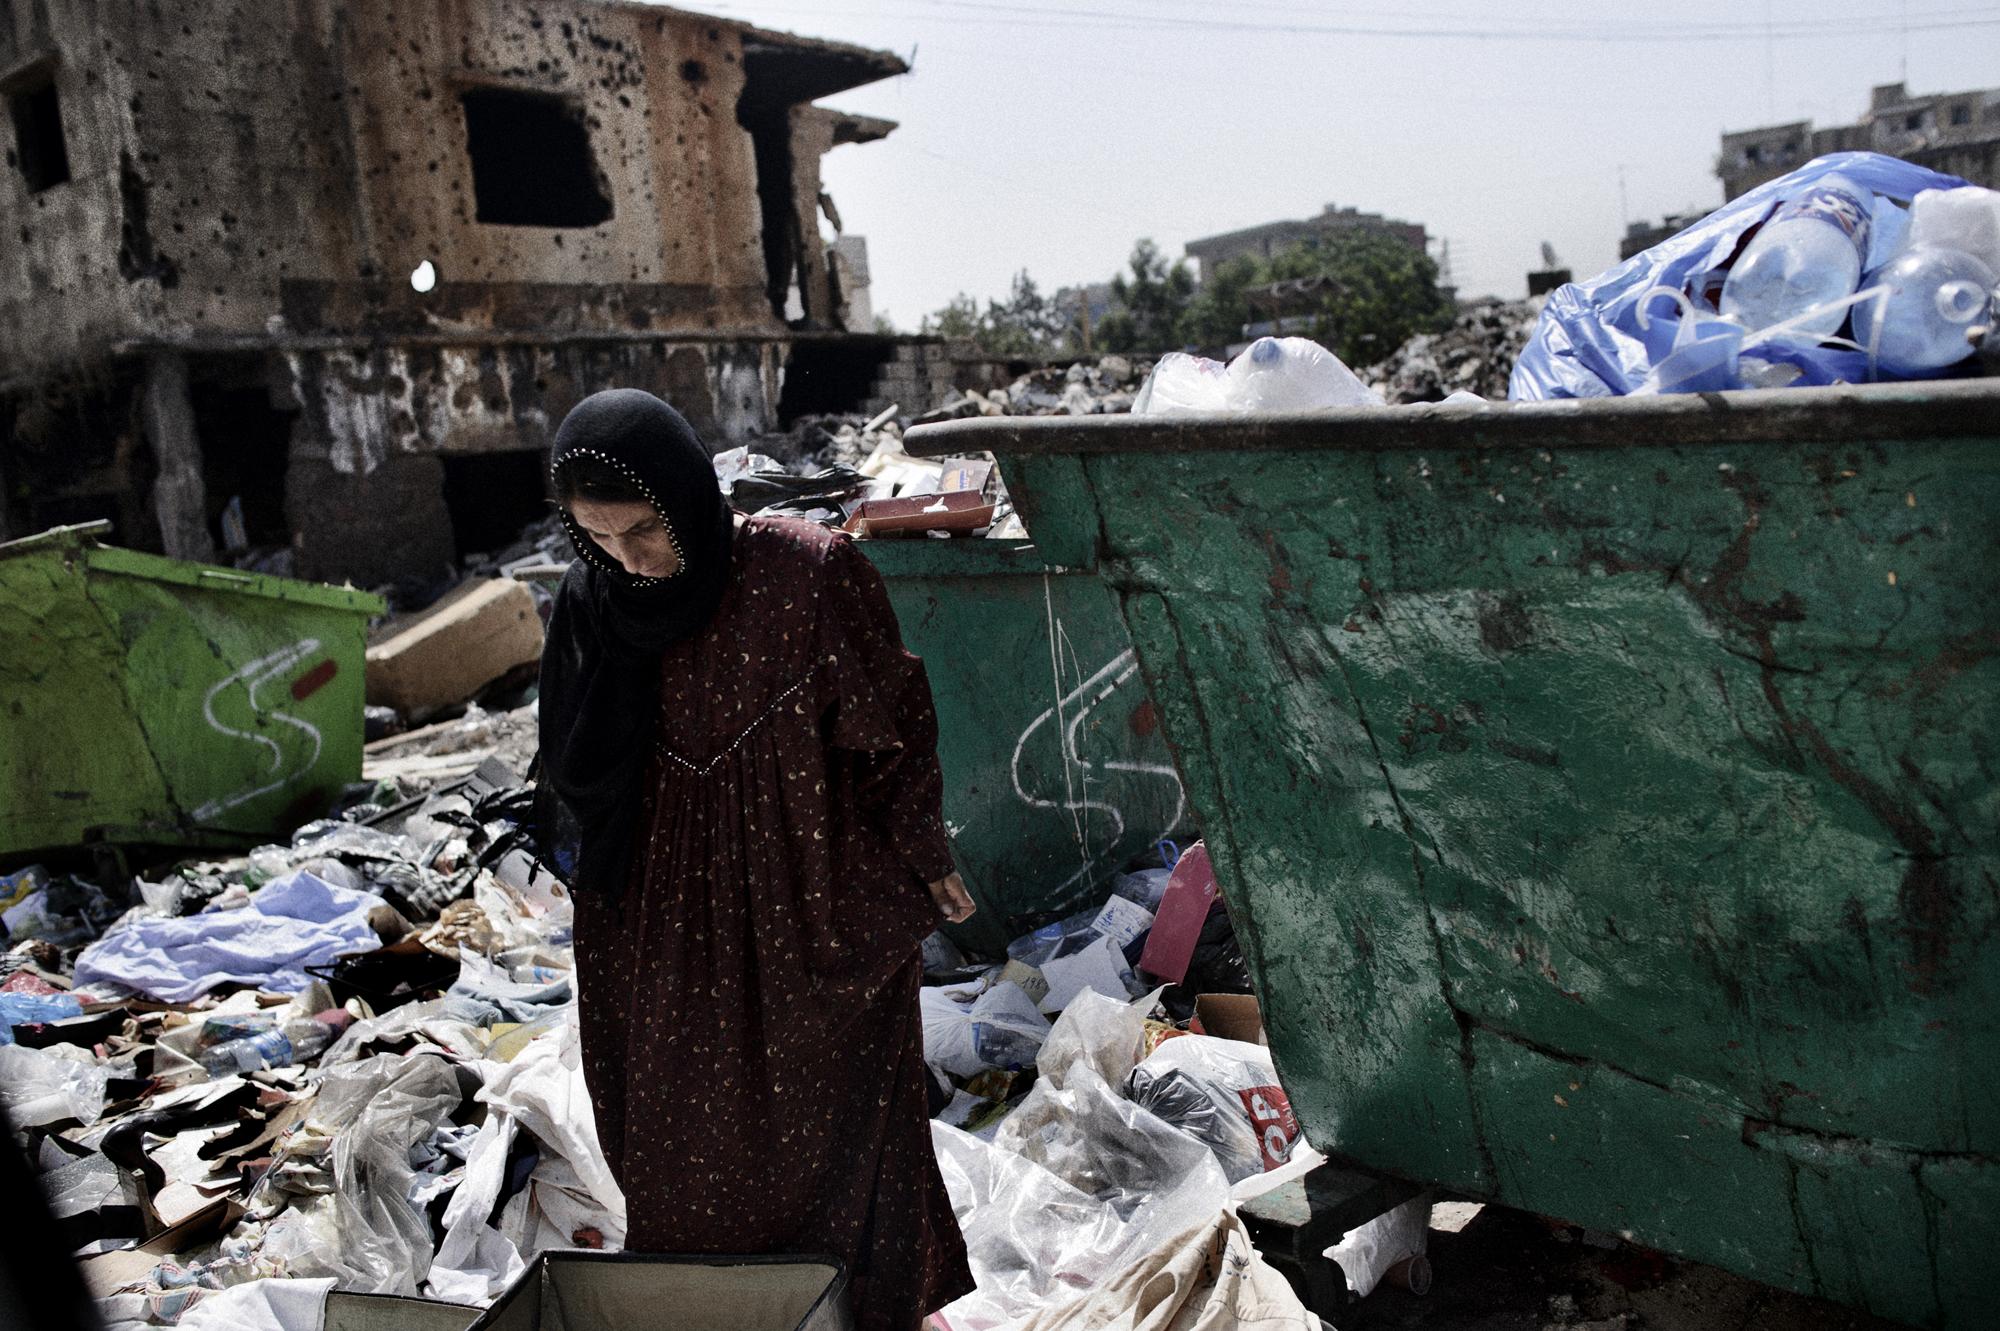 A women trying to find something valuable at the garbage dump of the overcrowded Beirut outskirts Sabra and Shatila in Lebanon, home to refugees...